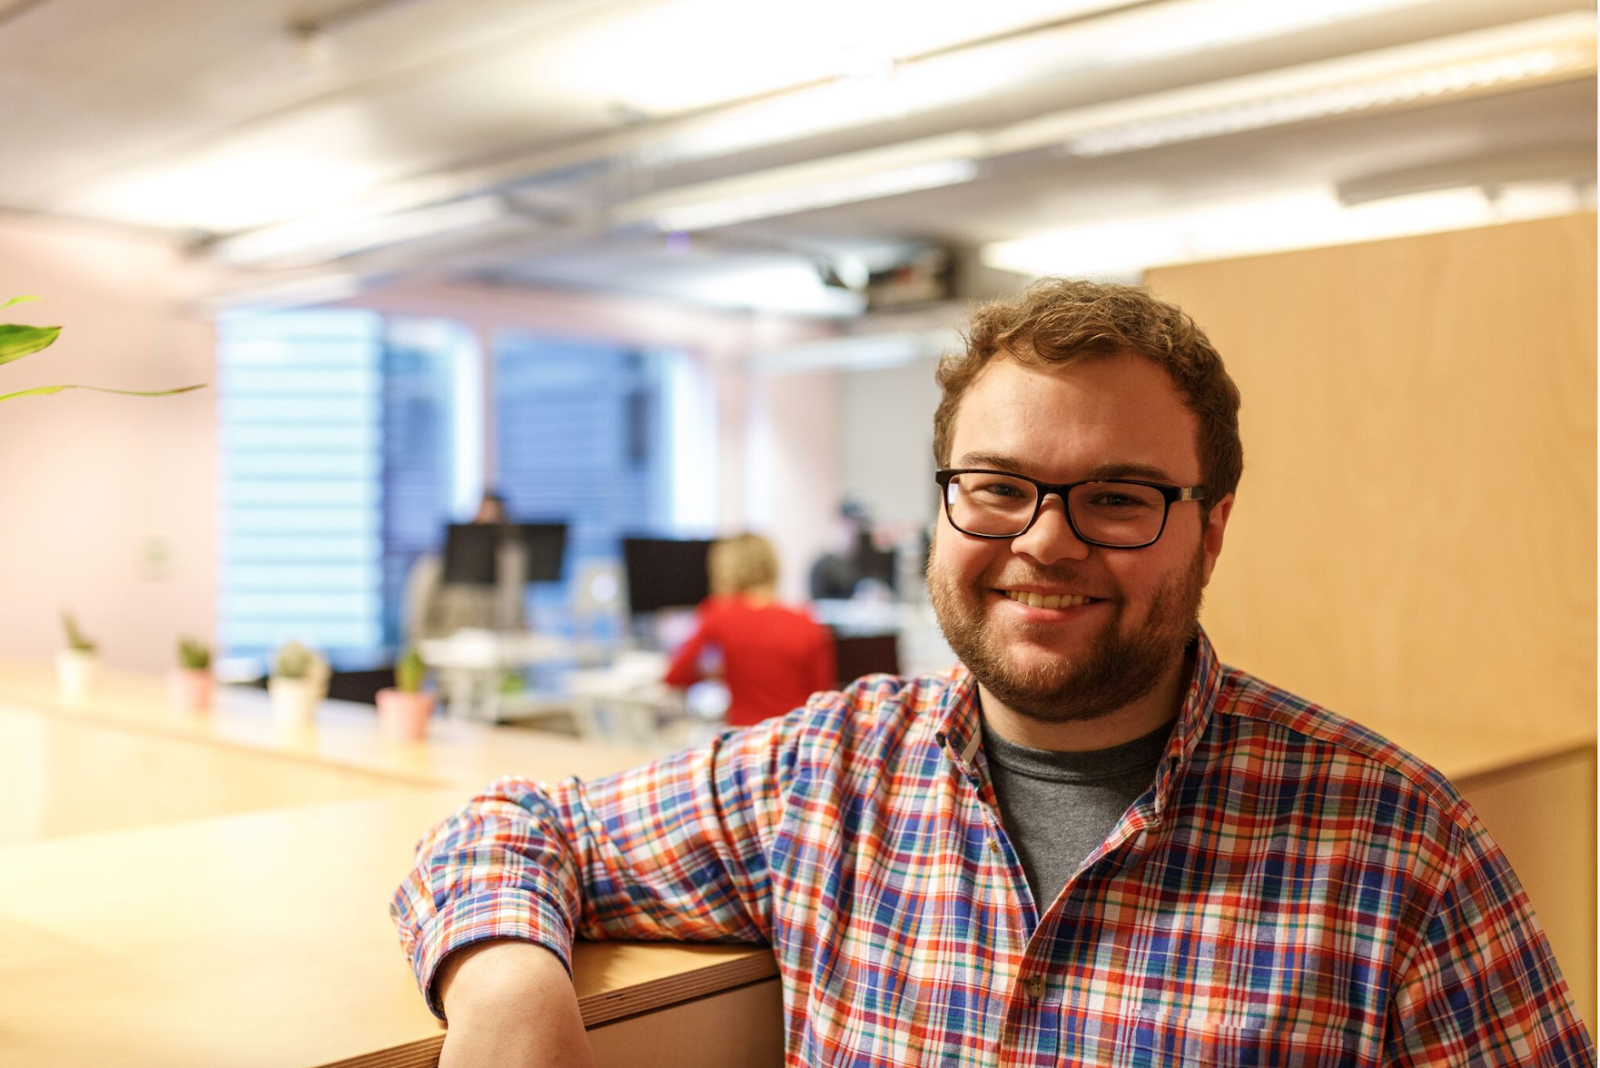 Paddle founder Christian Owens on changing how software is sold